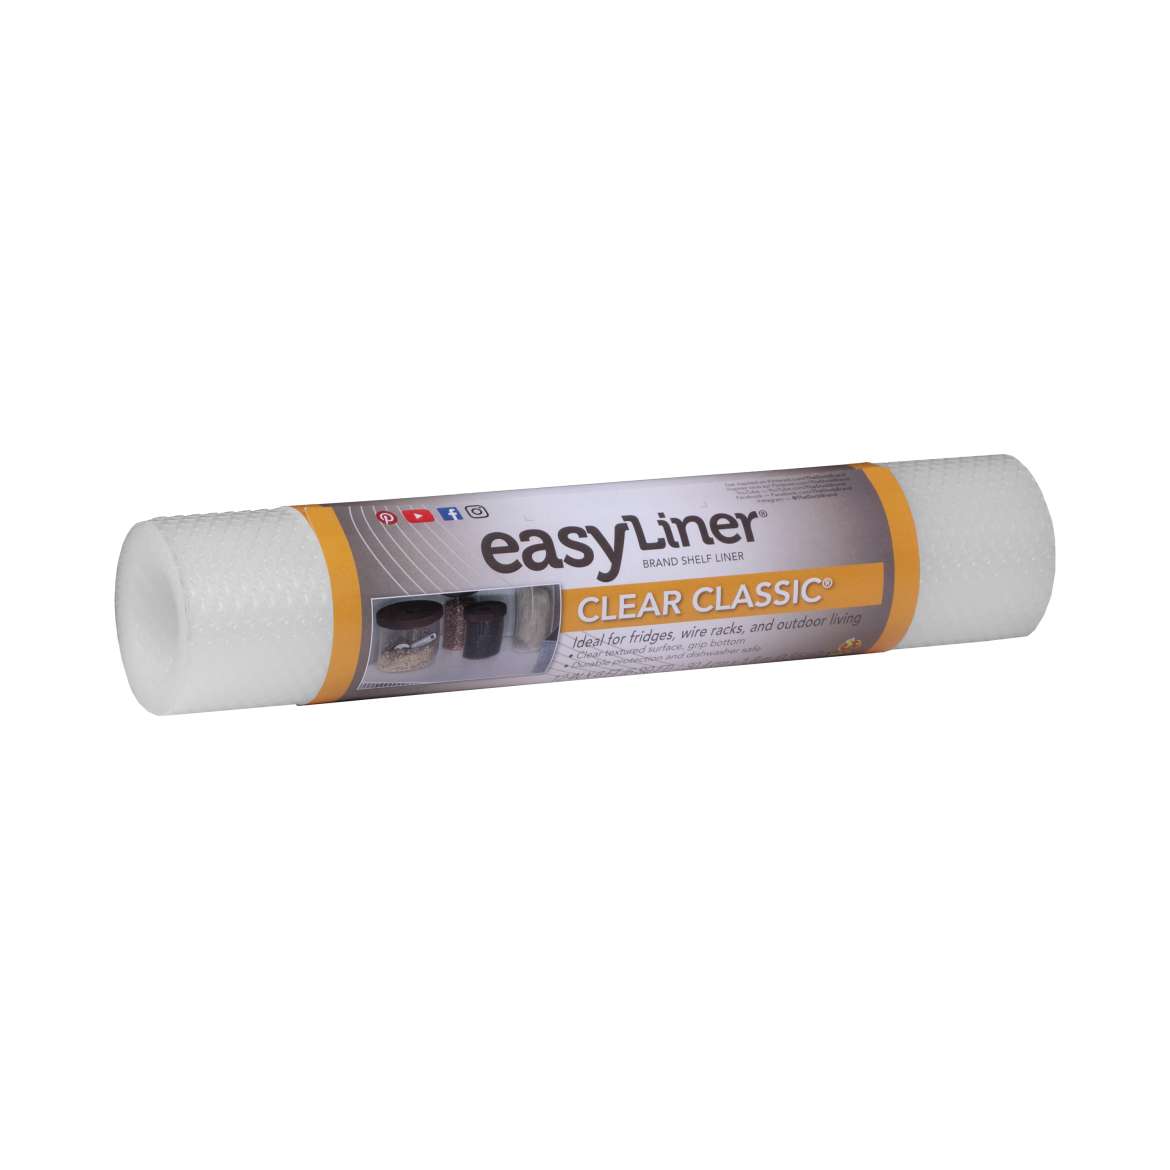 Clear Classic® EasyLiner® Brand Shelf Liner - Clear, 12 in. x 6 ft.